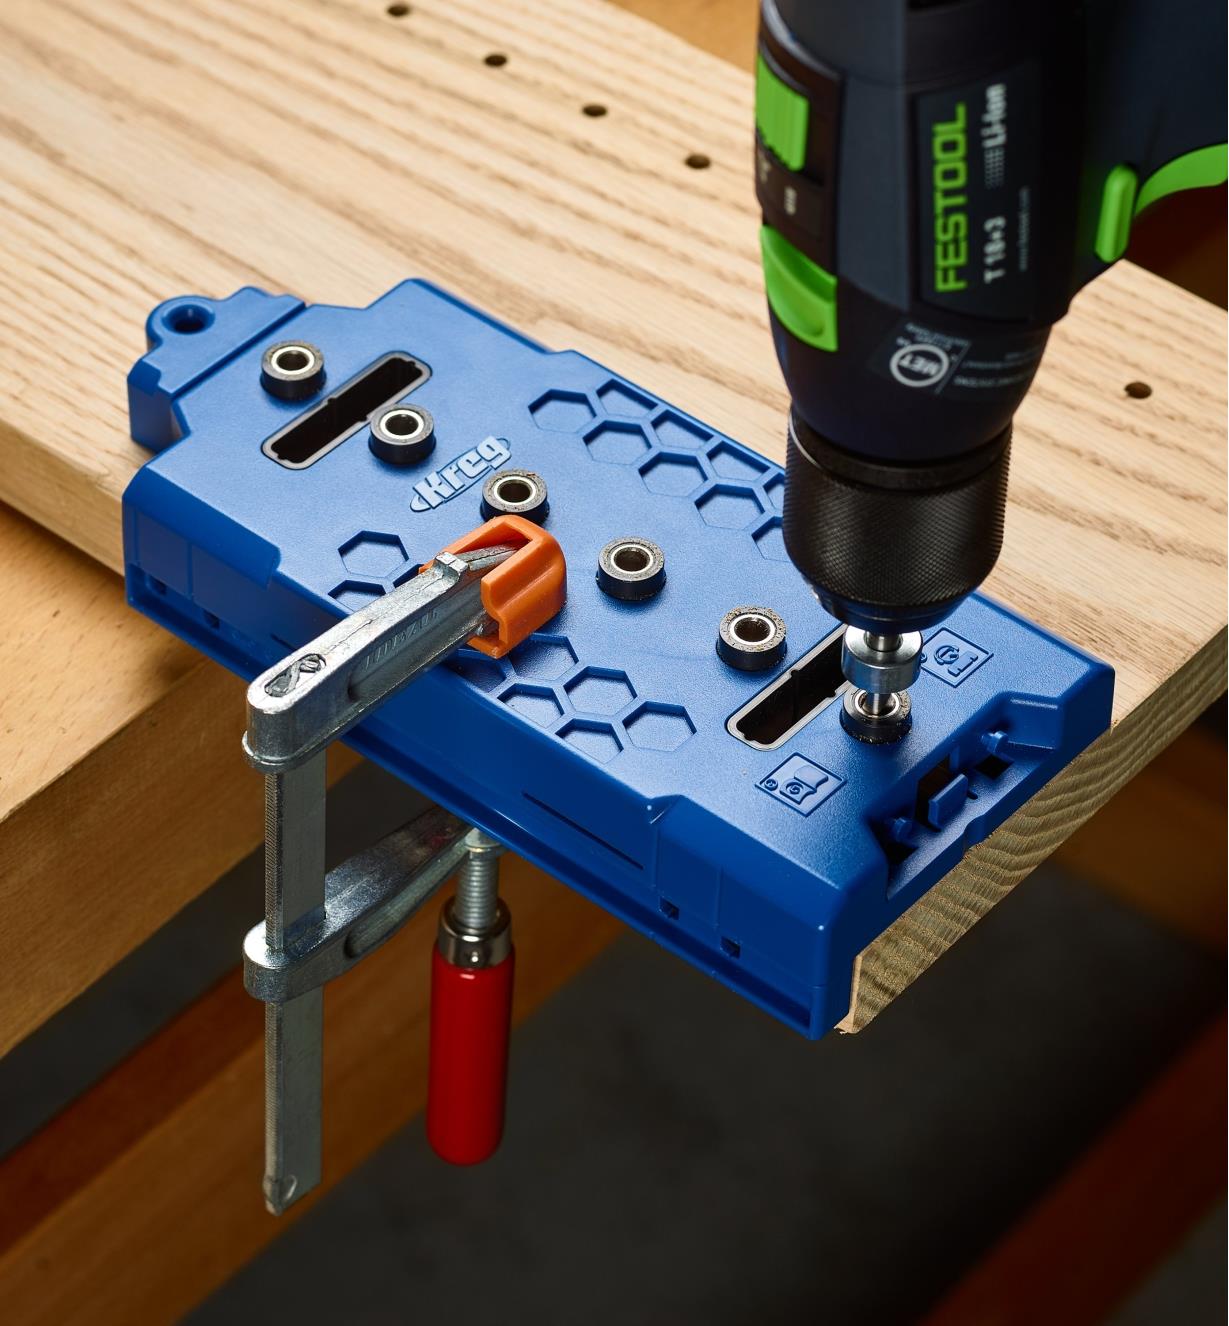 A jig clamped to a board as shelf pin holes are being drilled